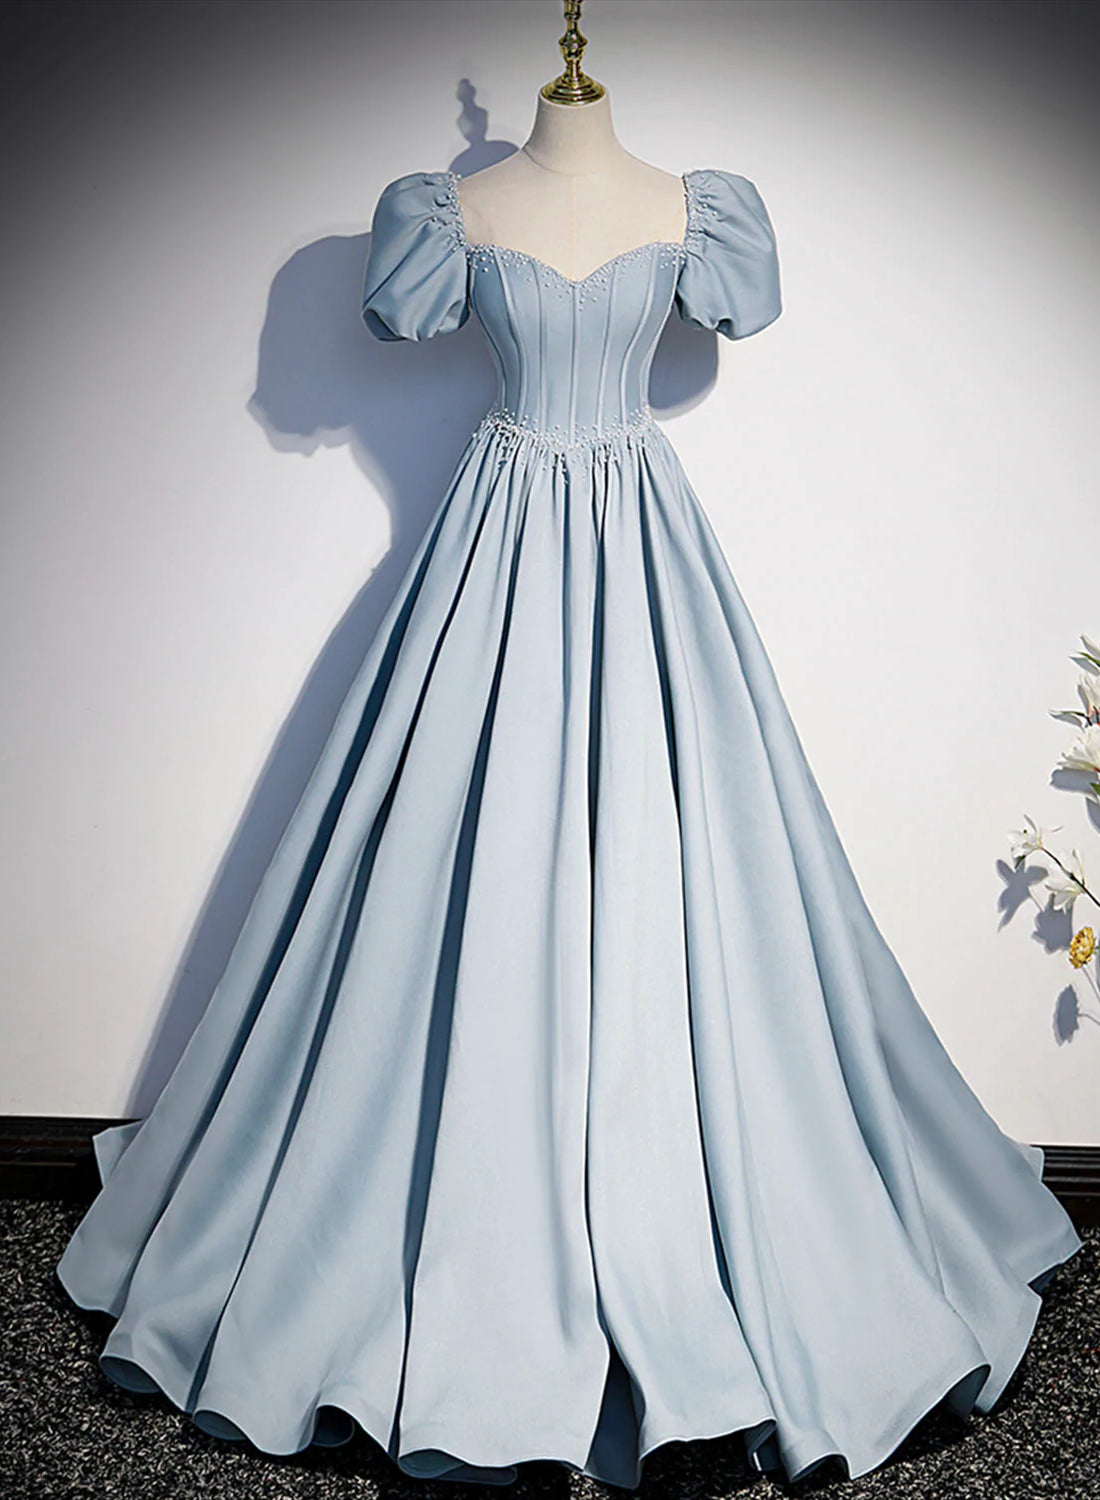 Blue Satin Long Prom Dress Outfits For Women with Pearls, Blue Short Sleeves A-line Evening Dress